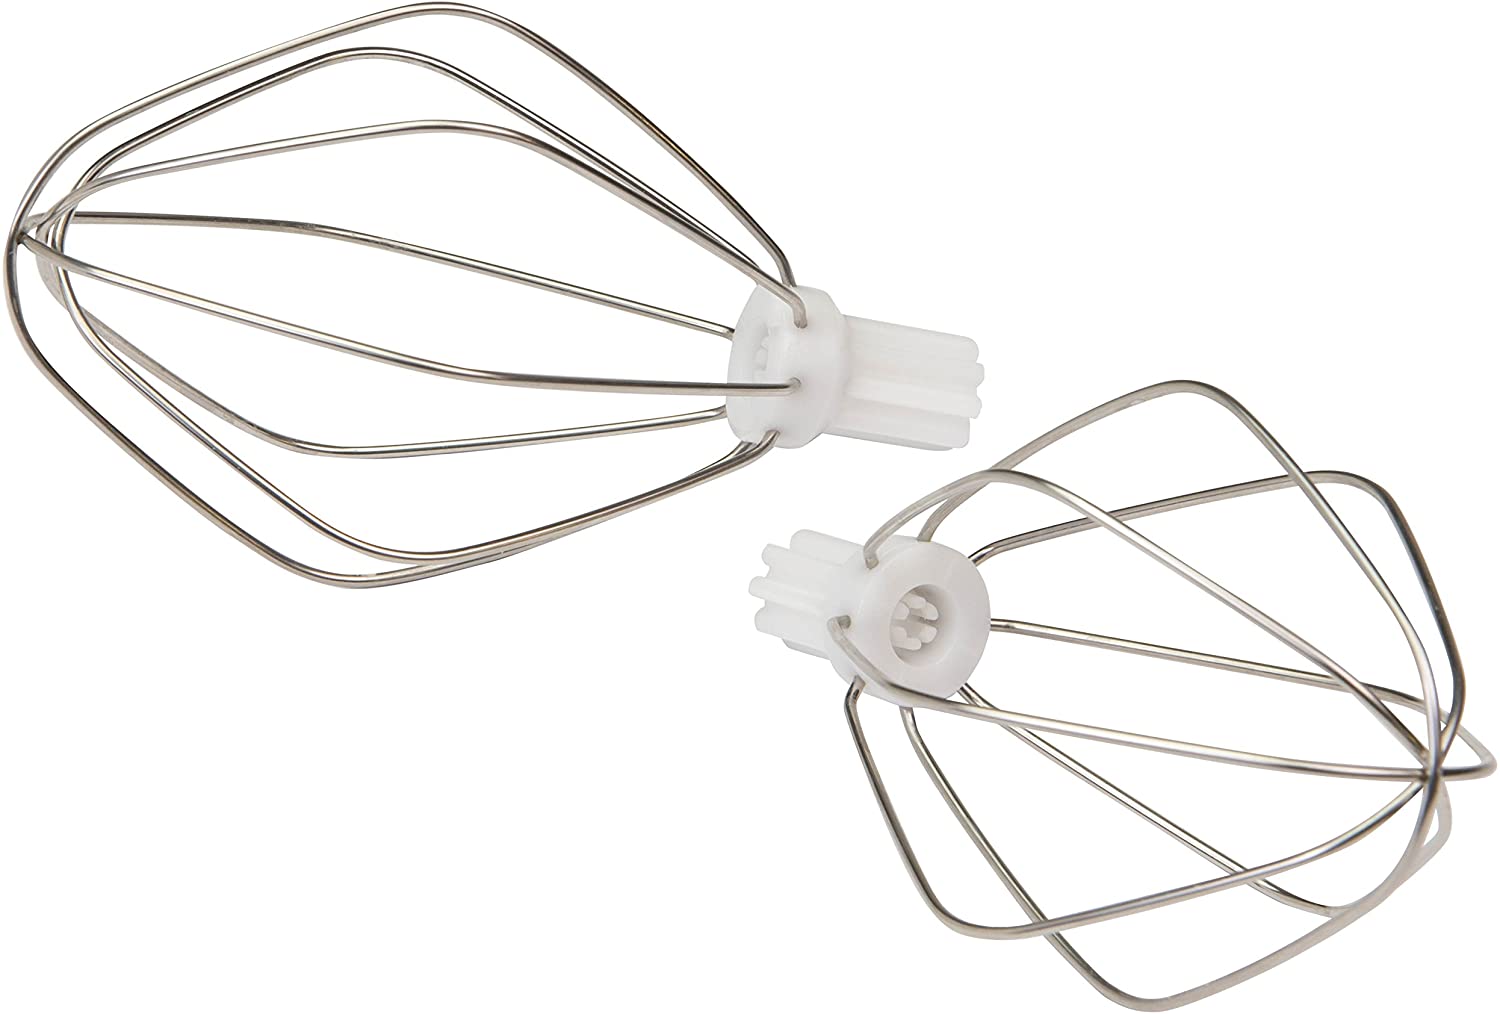 Bosch Universal Plus Wire Whips - Set of 2